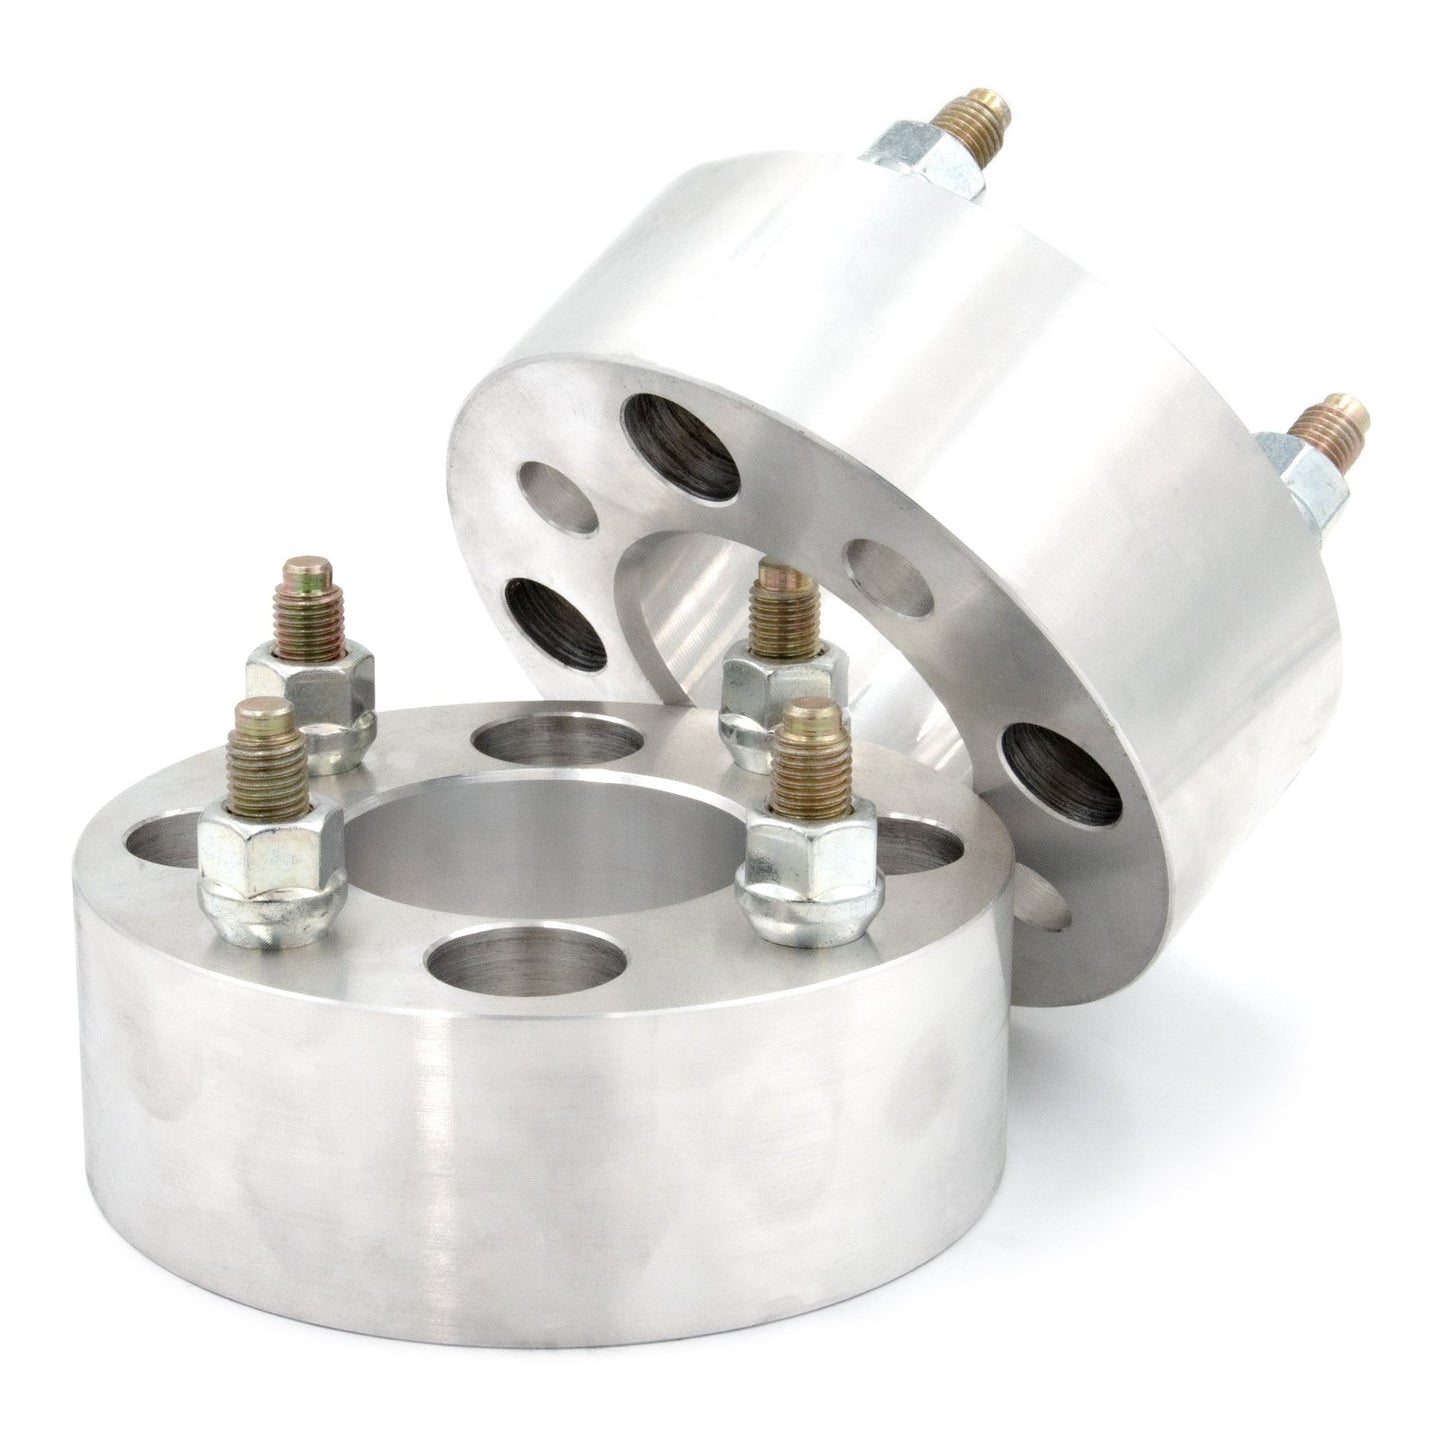 4x100 to 4x100 Wheel Spacer/Adapter - Thickness: 3/4"- 4"